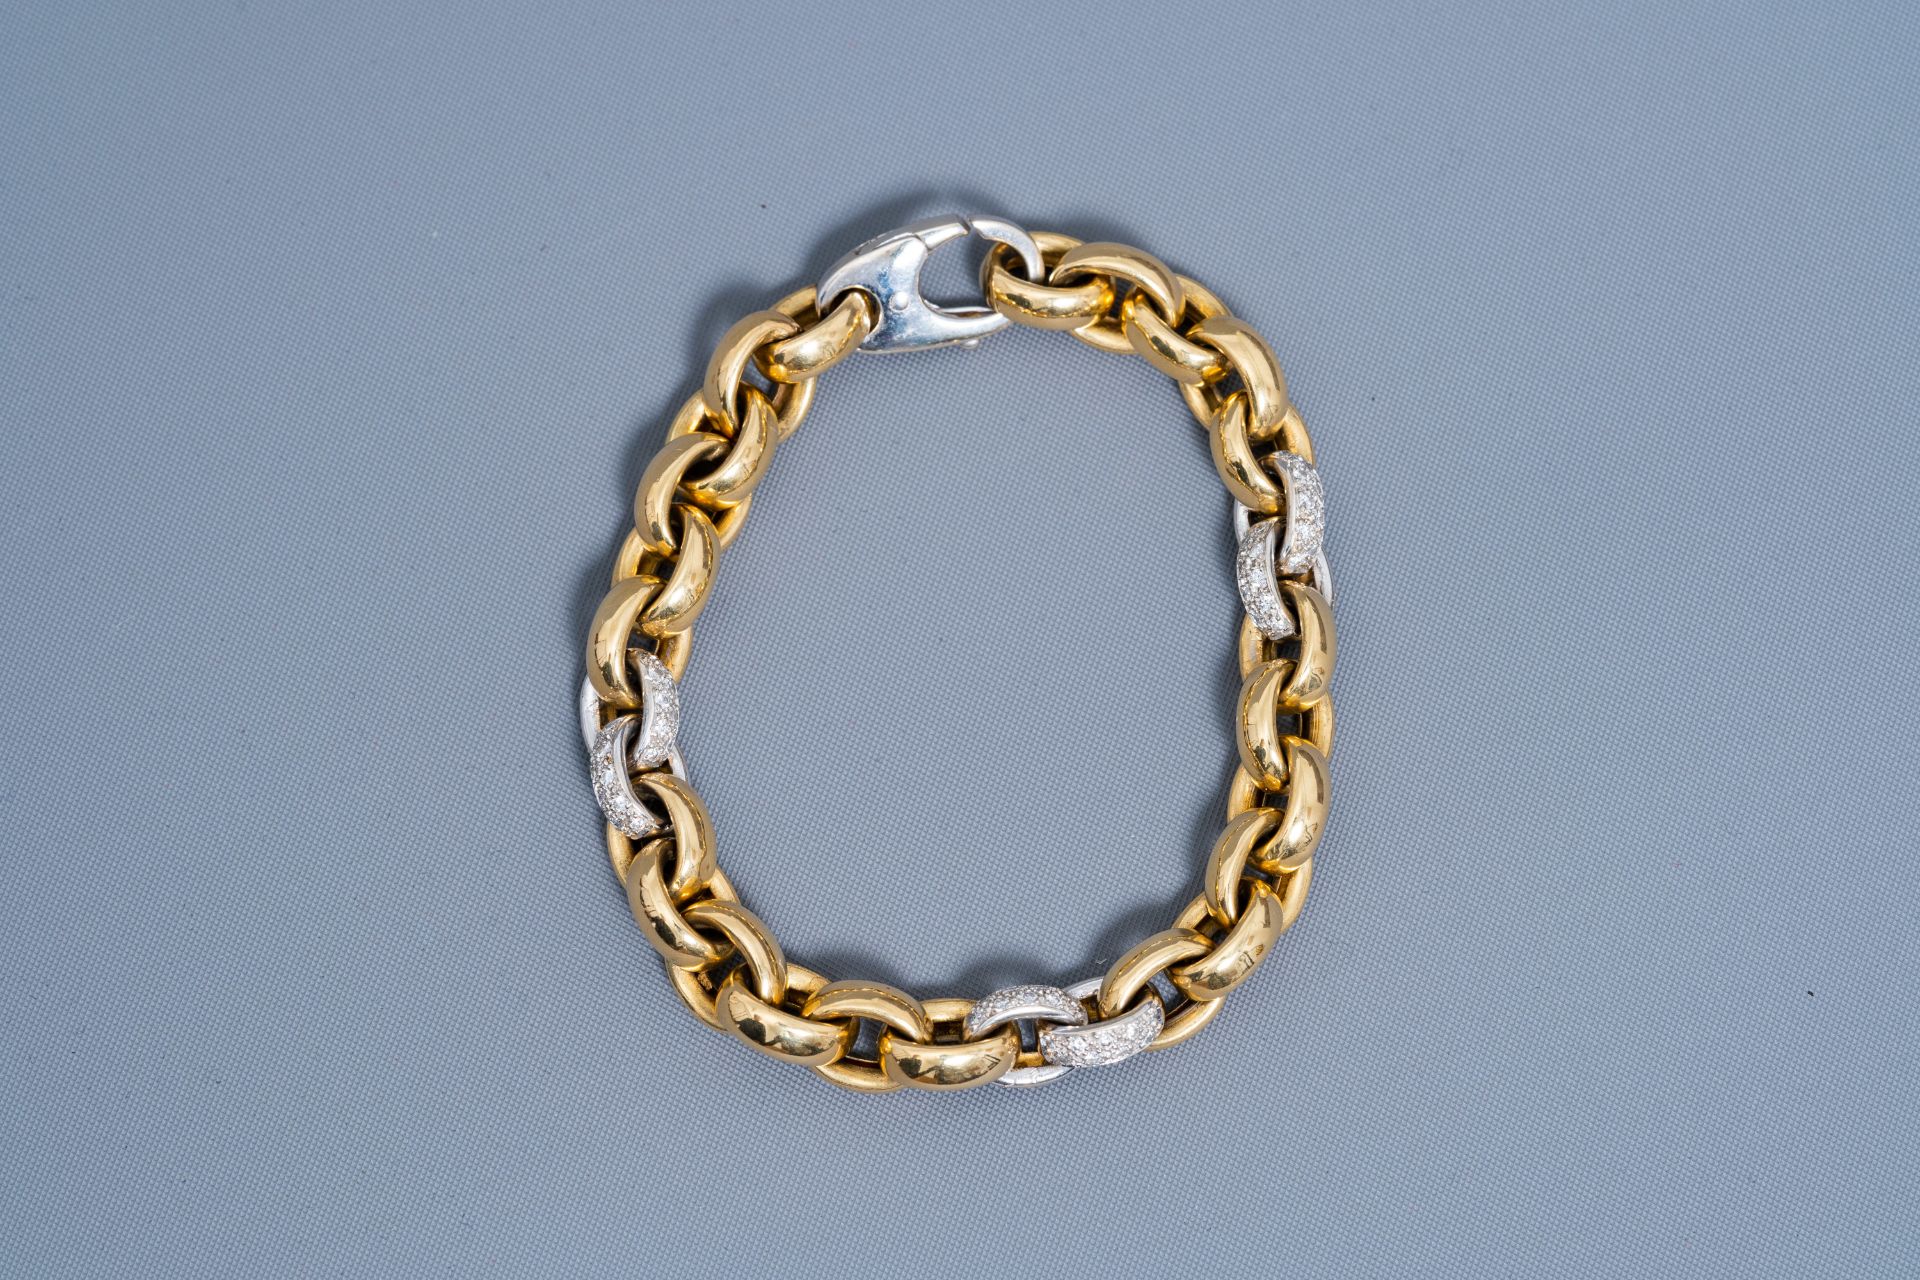 An 18 carat yellow and white gold bracelet set with 108 diamonds, 20th C. - Image 2 of 5